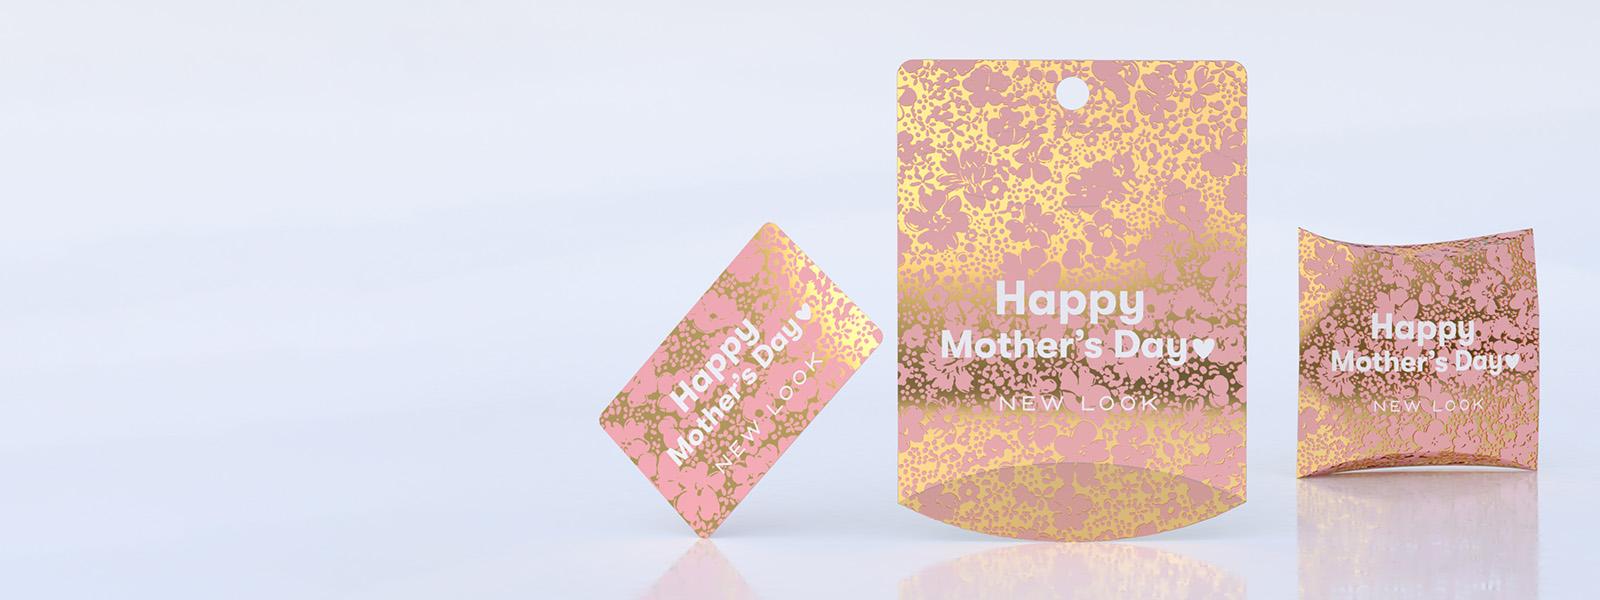 New Look Mother's Day gift card